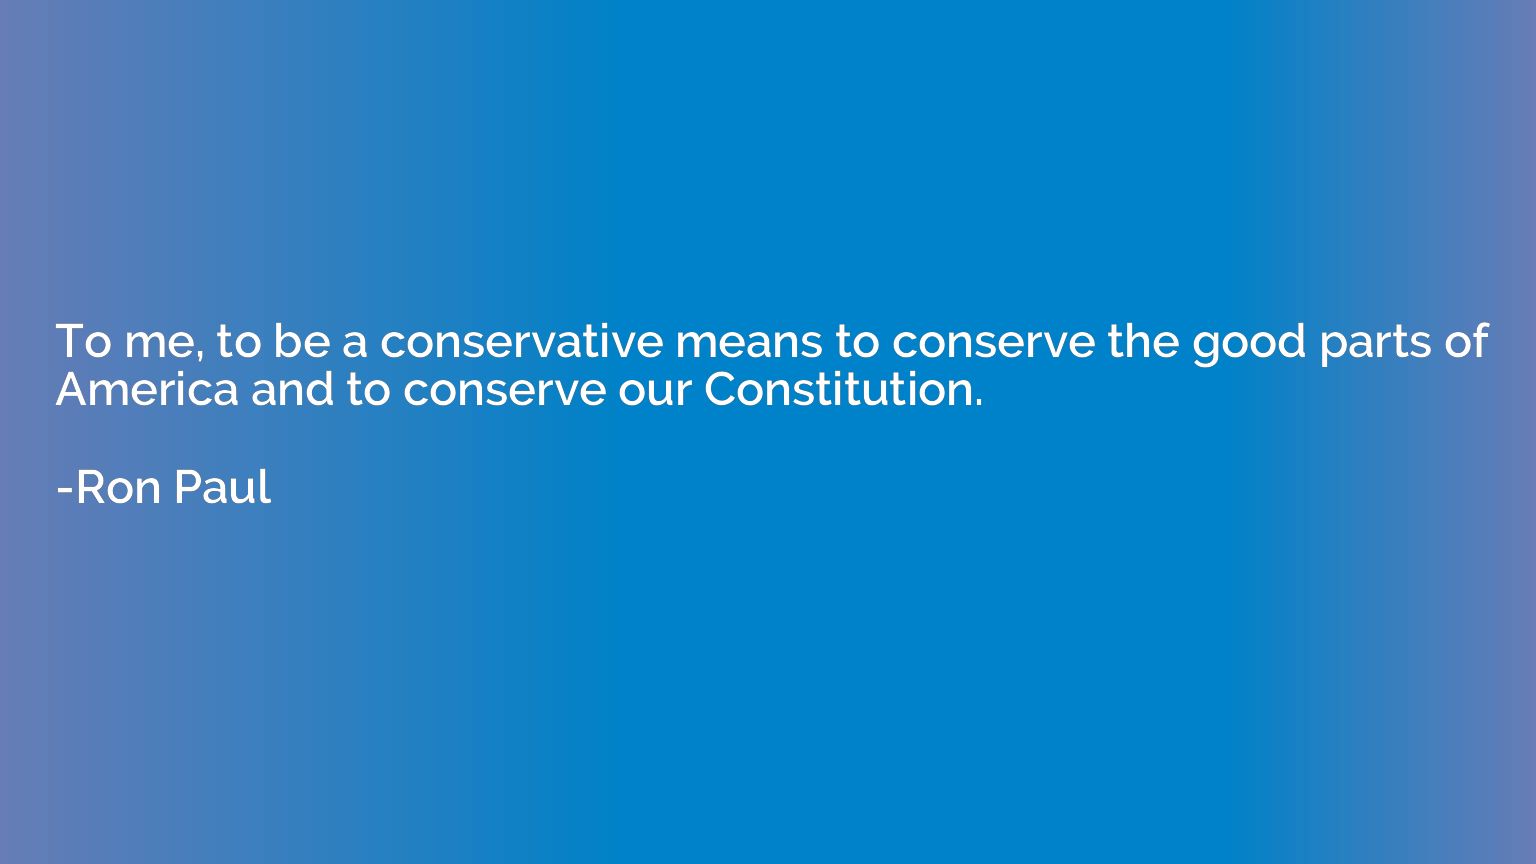 To me, to be a conservative means to conserve the good parts